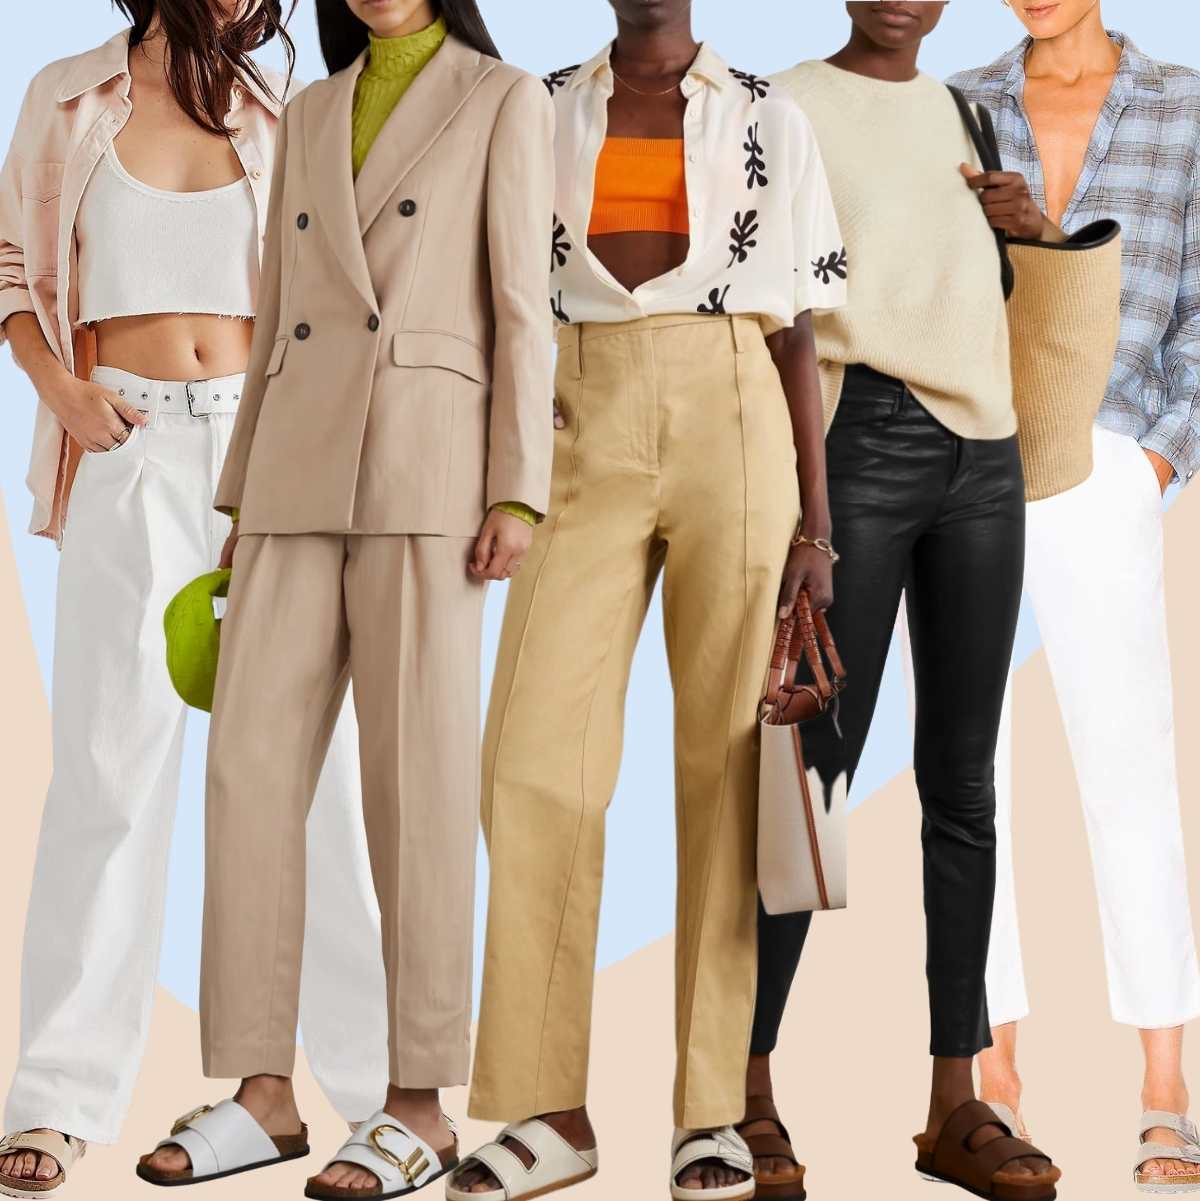 Collage of 5 women wearing different Birkenstock outfits with dress pants.